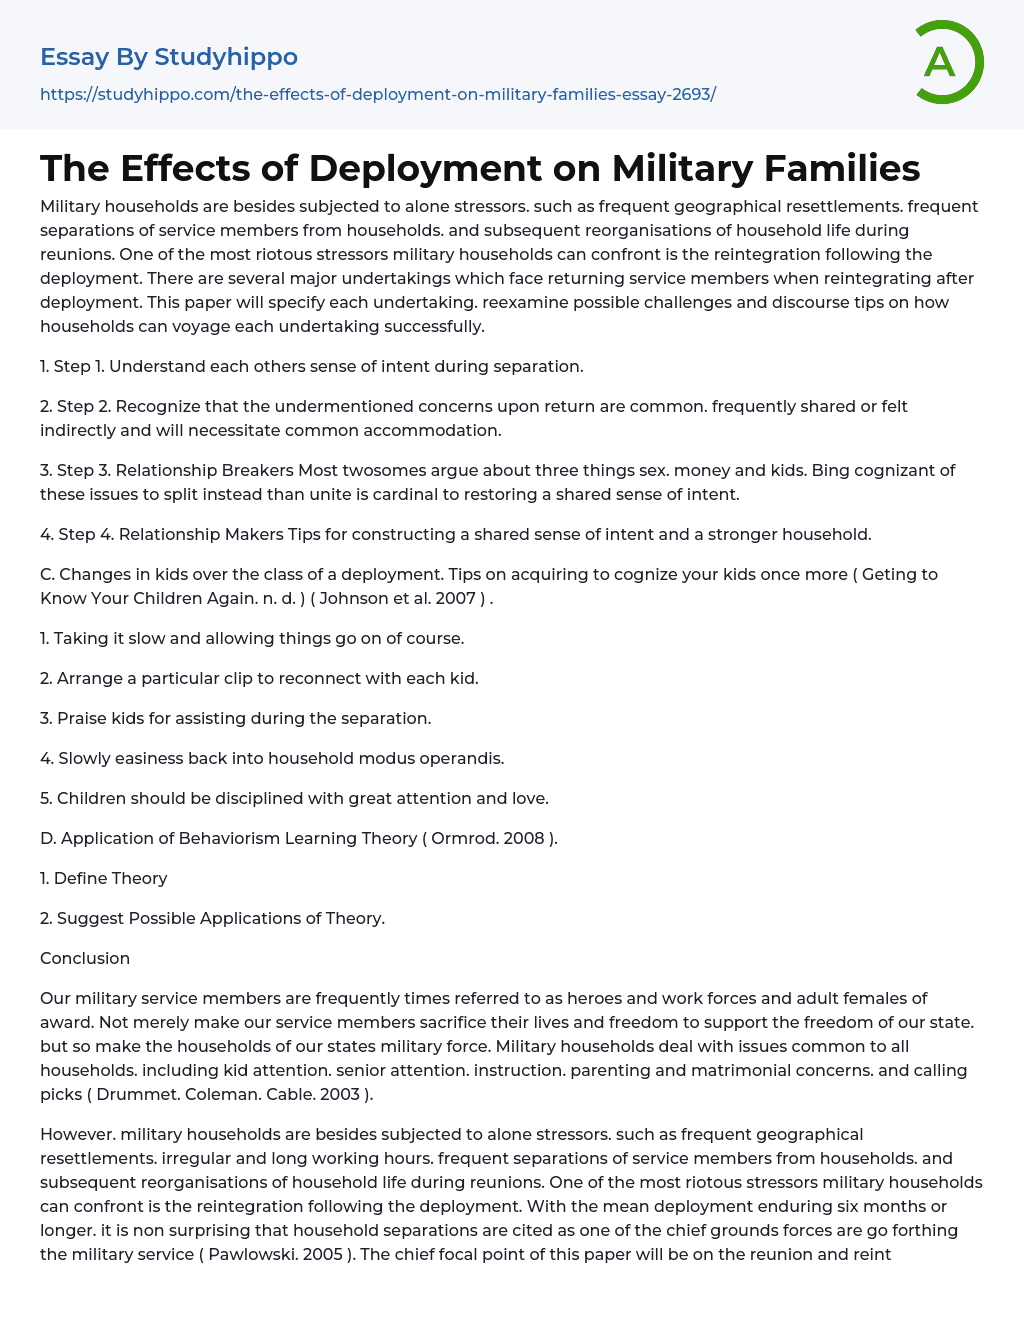 The Effects of Deployment on Military Families Essay Example